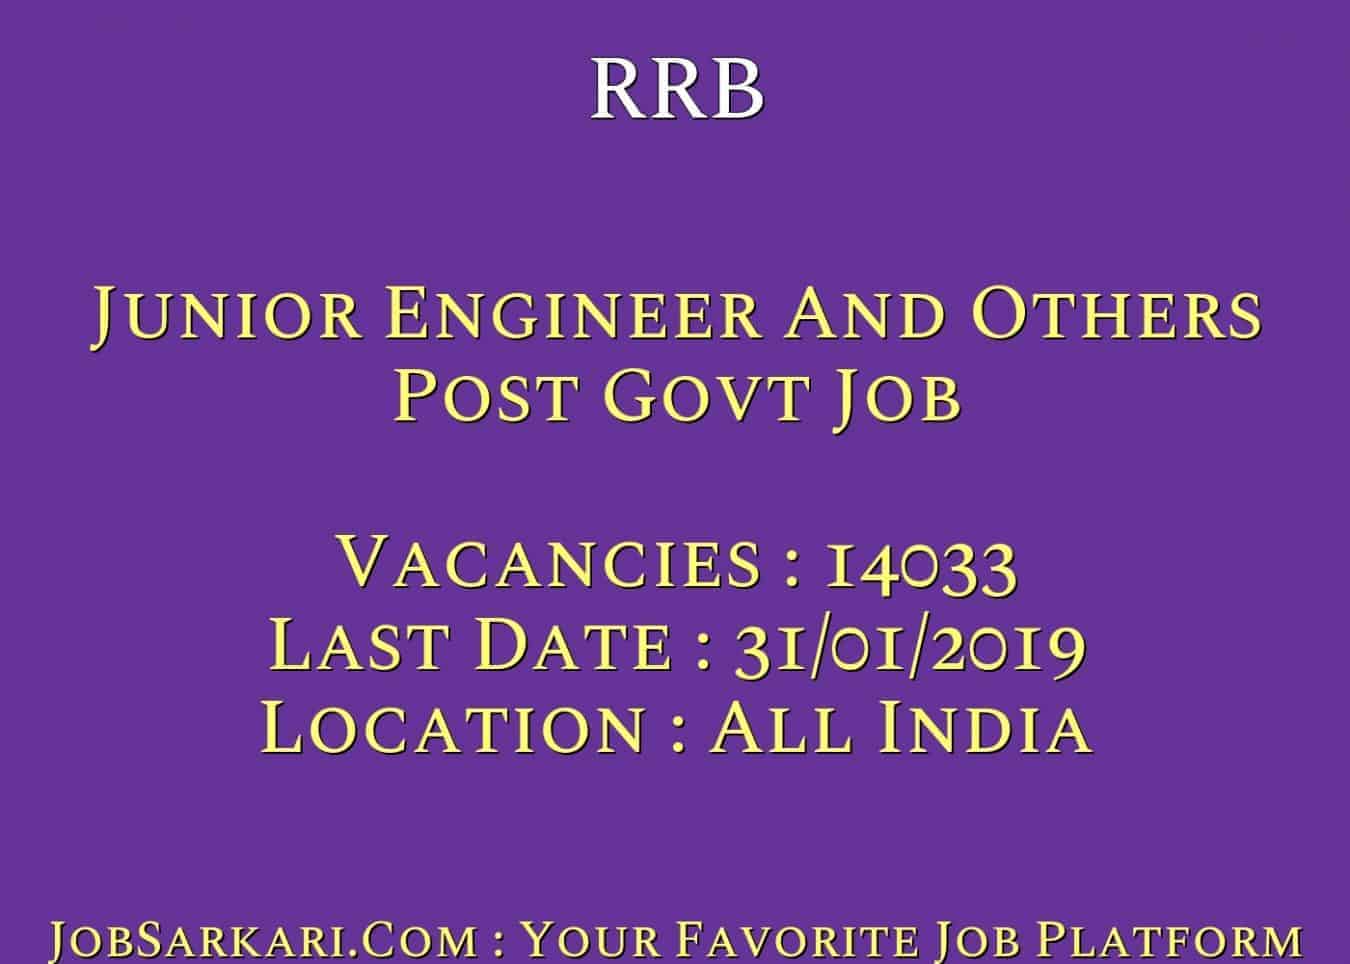 RRB Recruitment 2018 For Junior Engineer And Others Post Govt Job